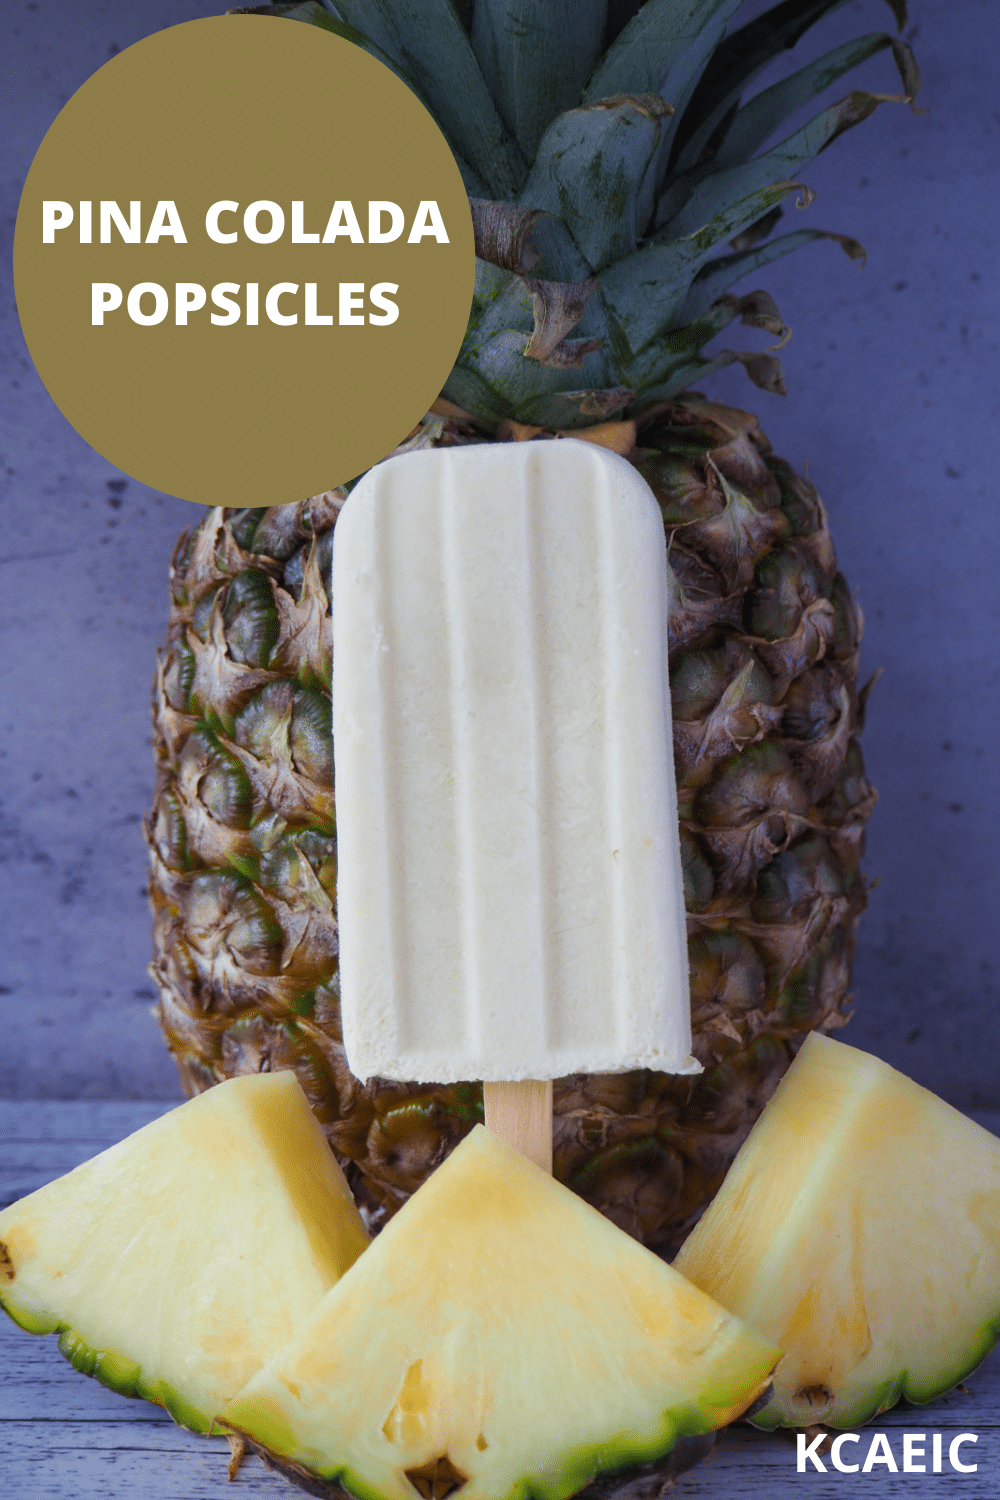 Single pina colada popsicle in front of a fresh pineapple, with fresh sliced pineapple in front and text overlay, pina colada popsicles and KCAEIC.